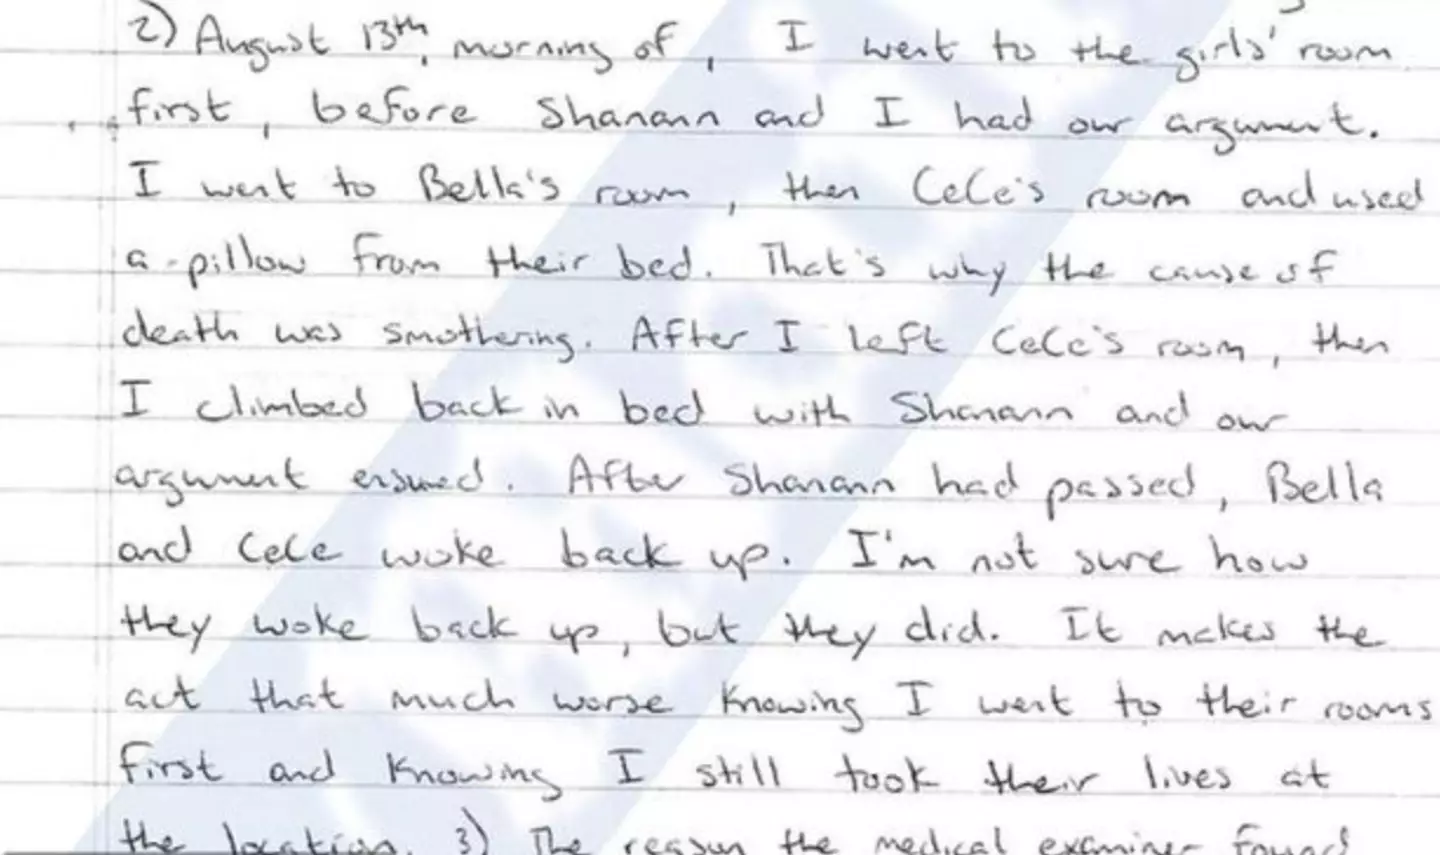 Chris Watts wrote letters about his crimes.